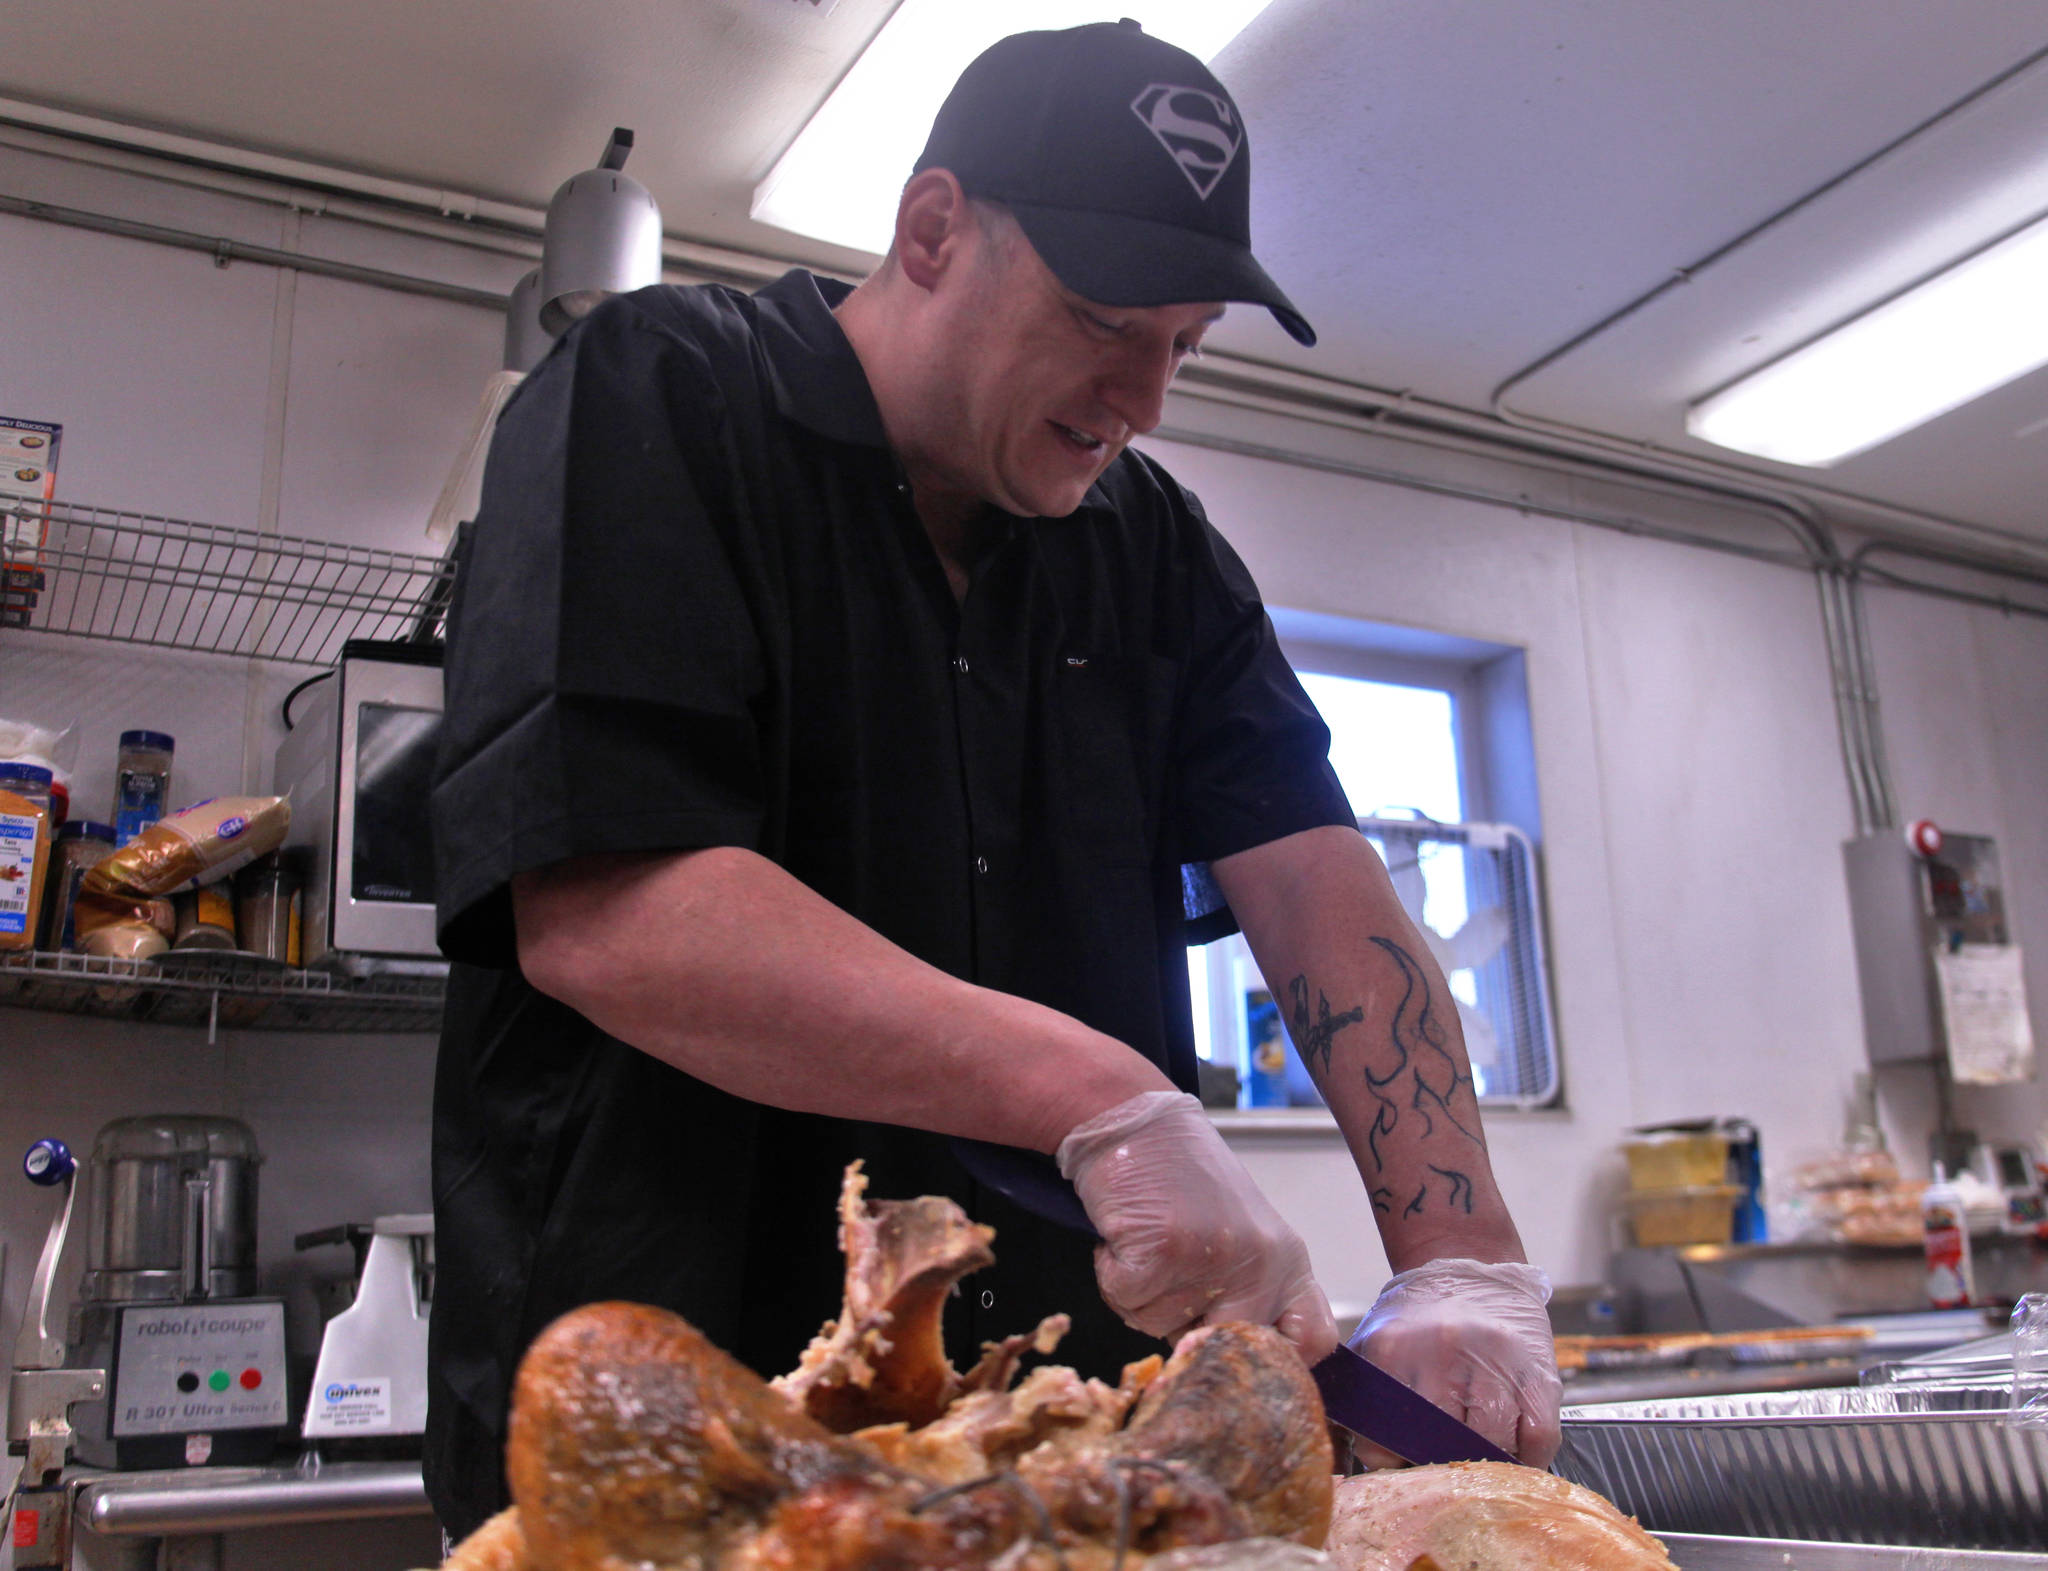 Kitchen manager Beau Jamison of the Duck Inn slices the breast meat of one of the twelve turkeys he prepared for the restuarant’s Thanksgiving dinner at the Duck Inn on Kalifornsky Beach Road on Thursday, Nov. 23, 2017 near Soldotna, Alaska. This Thanksgiving — the twelfth for which that Jamison has prepared the Duck Inn’s traditional meal, closes a year of hardship for Jamison — in August he recieved a clean diagnosis after struggling with lymphoma since October 2016, and it’s his first year as a single father after his wife’s death. (Ben Boettger/Peninsula Clarion)